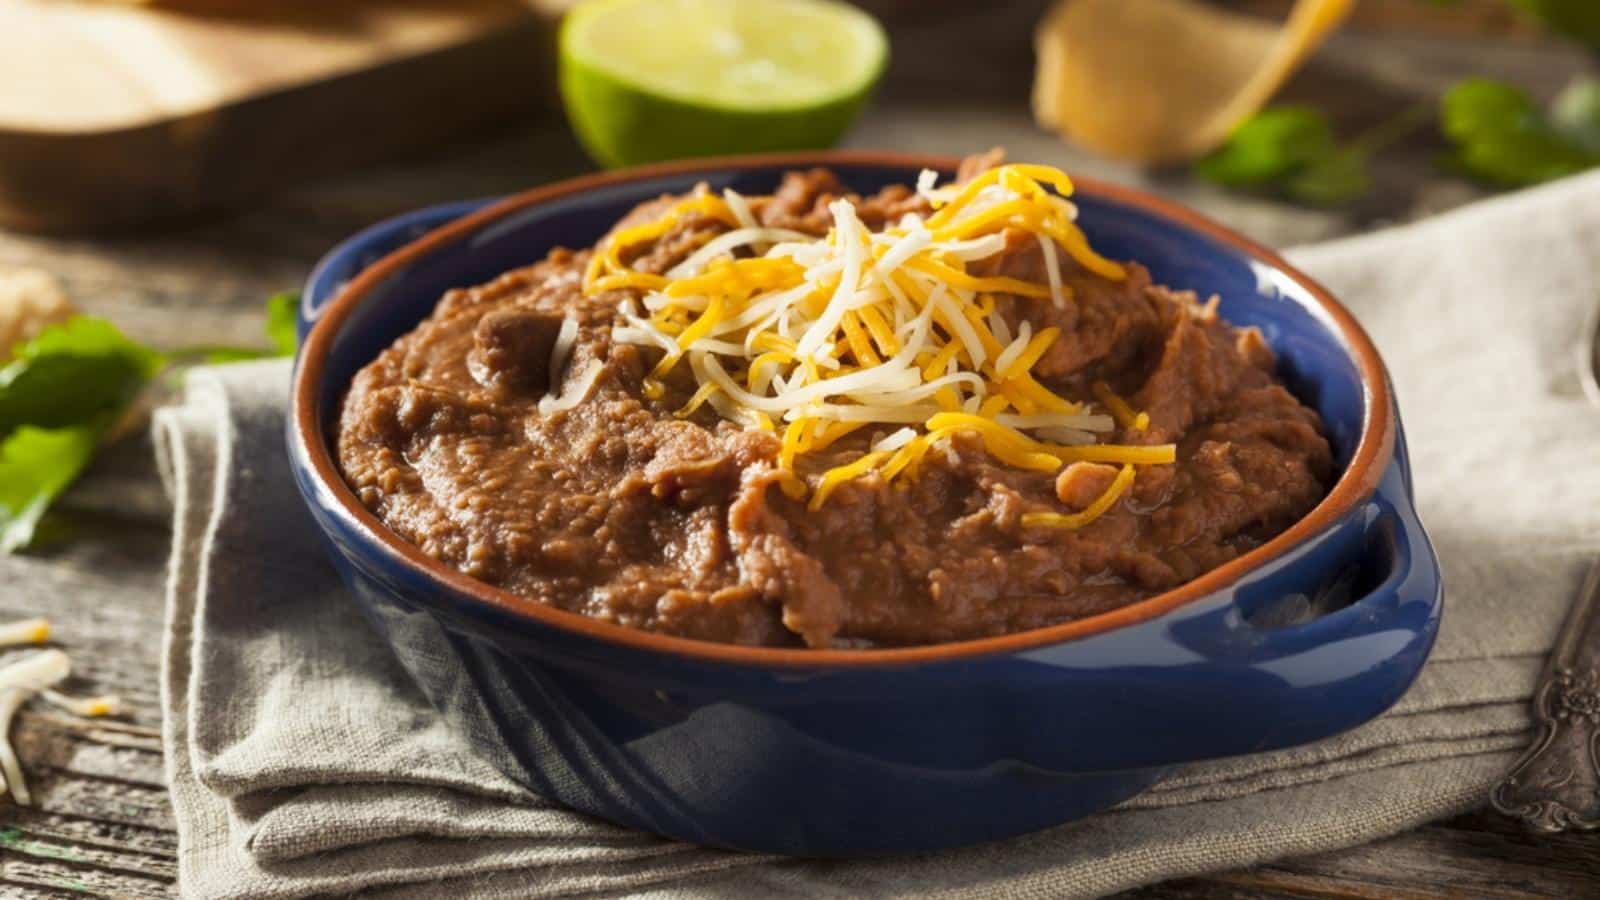 How To Thicken Refried Beans